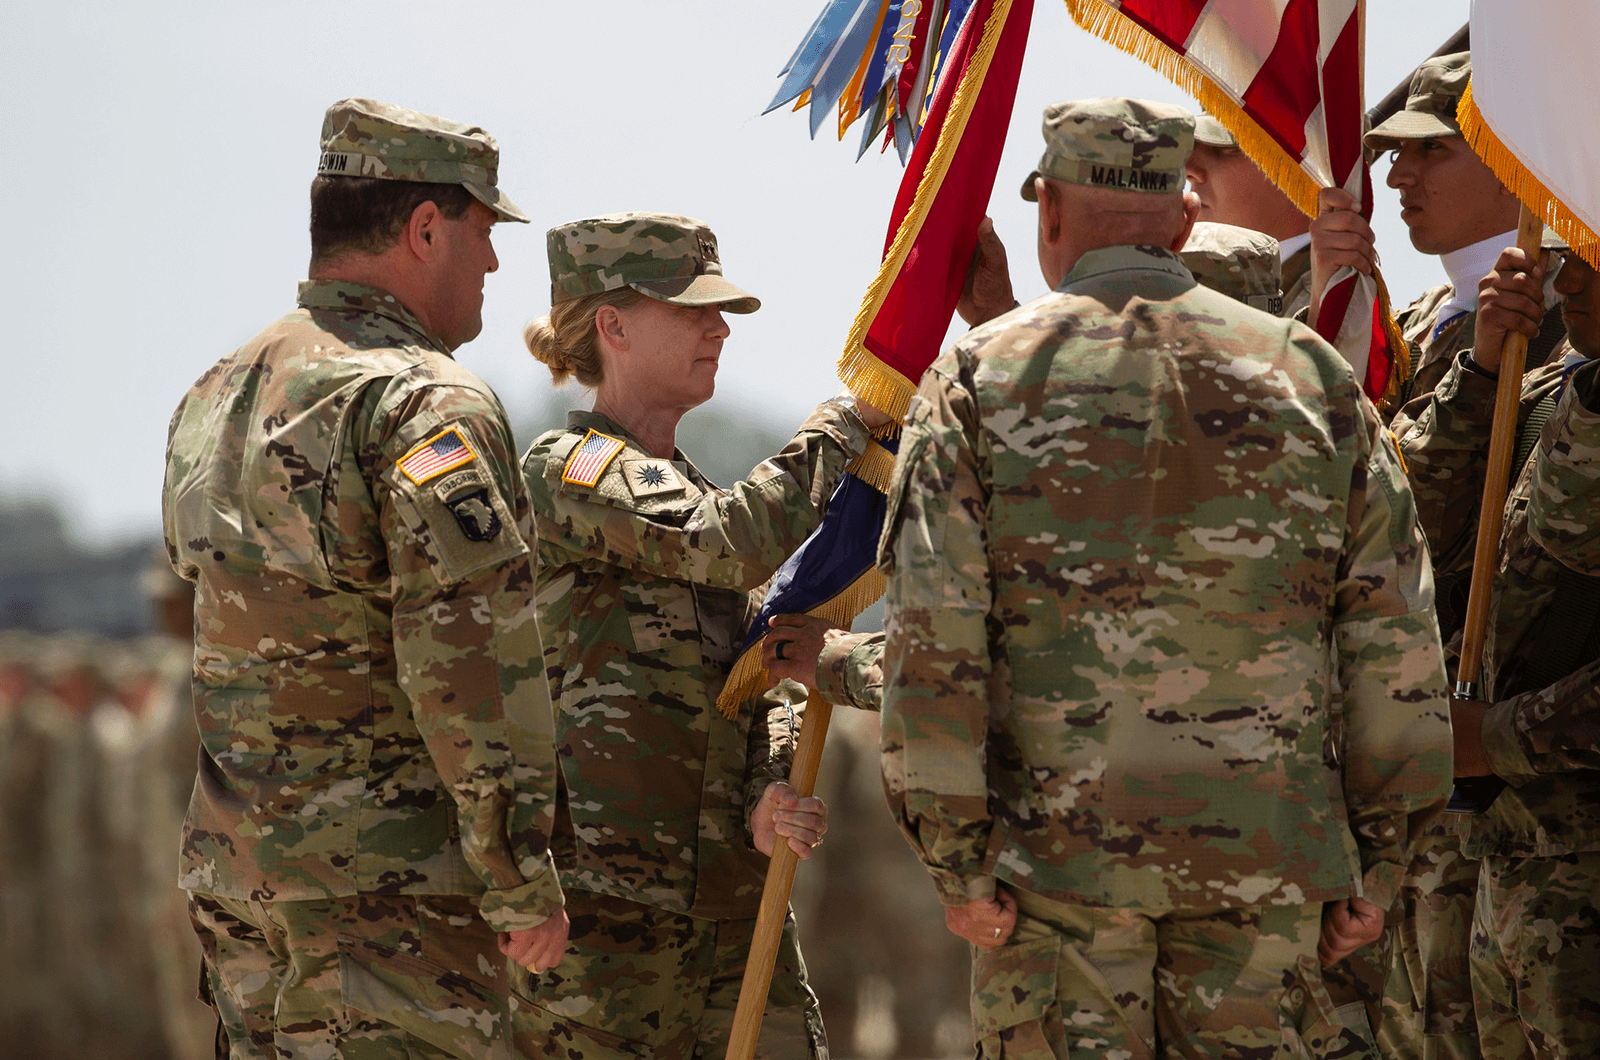 U.S. Army Maj. Gen. Laura Yeager takes command of the California Army National Guard's 40th Infantry Division during a ceremony on June 29, 2019, at Joint Forces Training Base in Los Alamitos, California. Yeager is the first woman to command a U.S. Army infantry division.    *Photos by the California National Guard